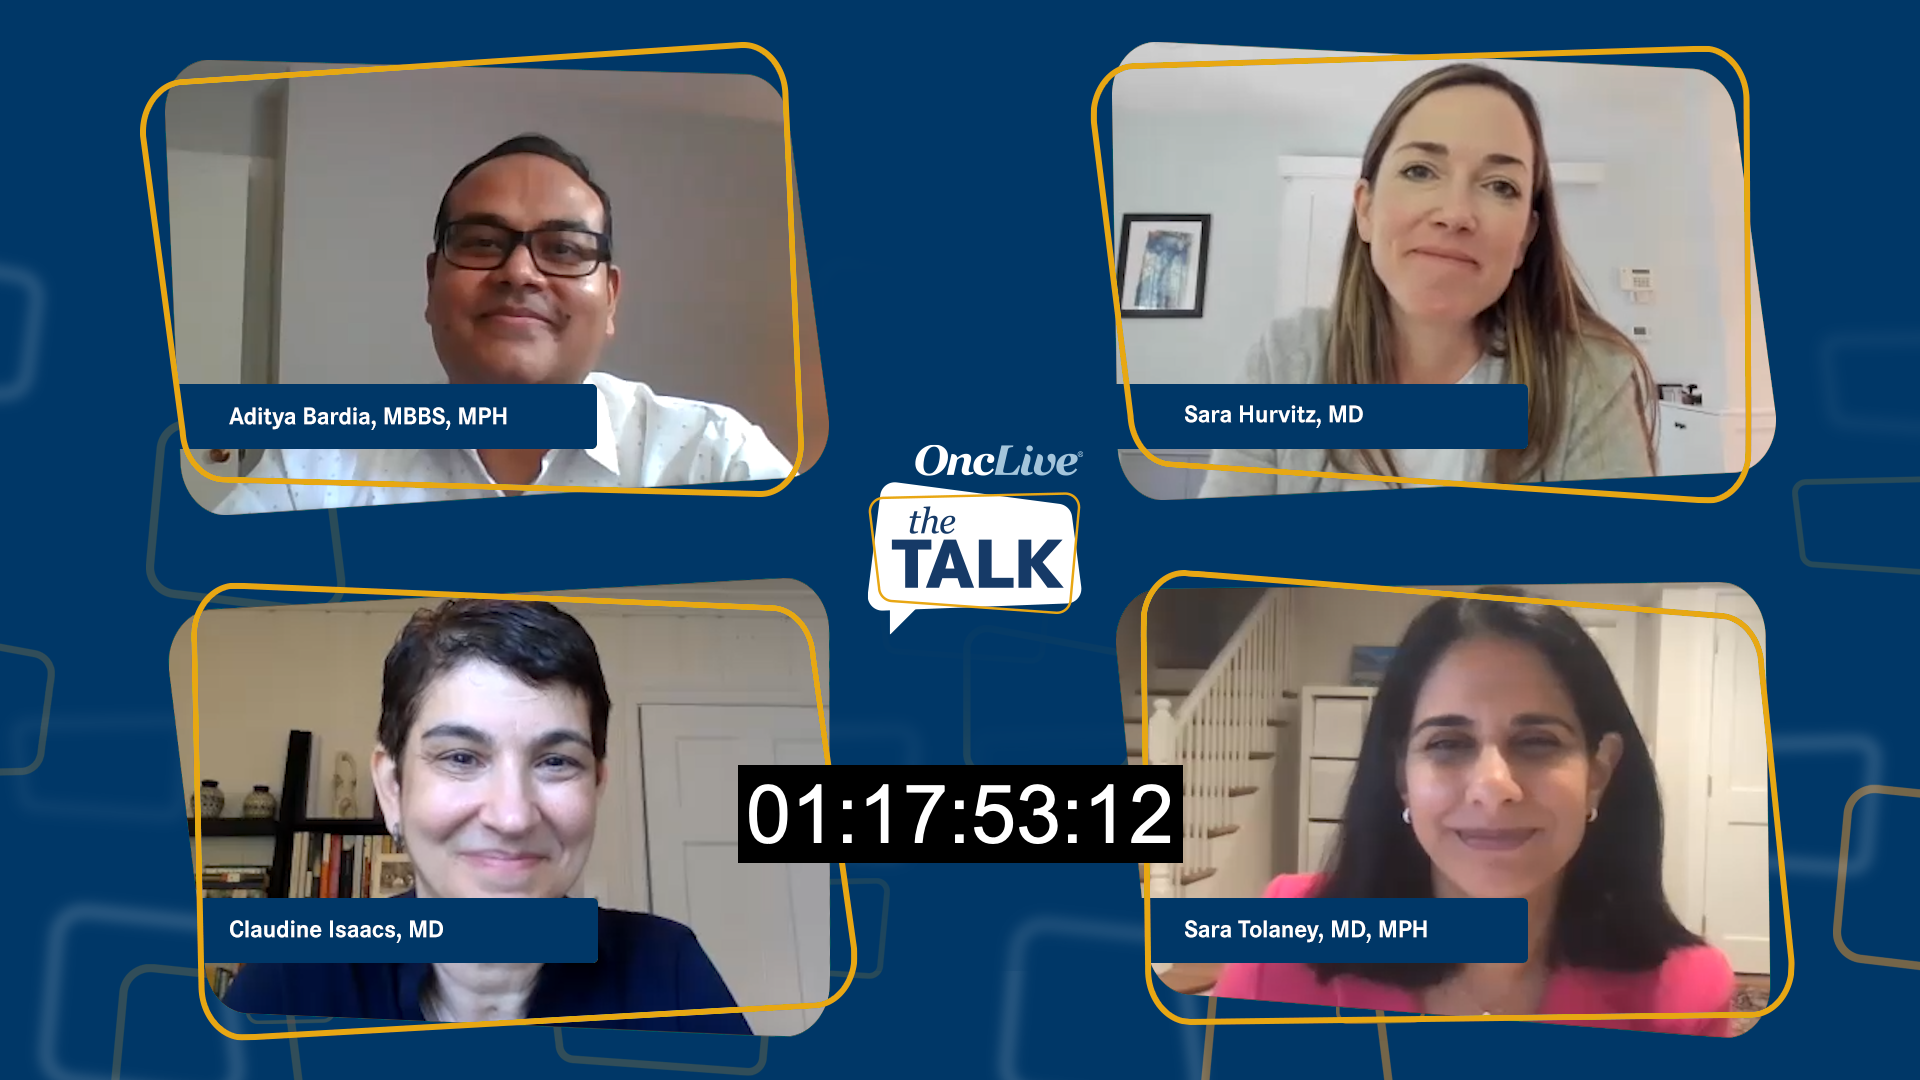 Review of Data from the ASCO 2020 Virtual Meeting